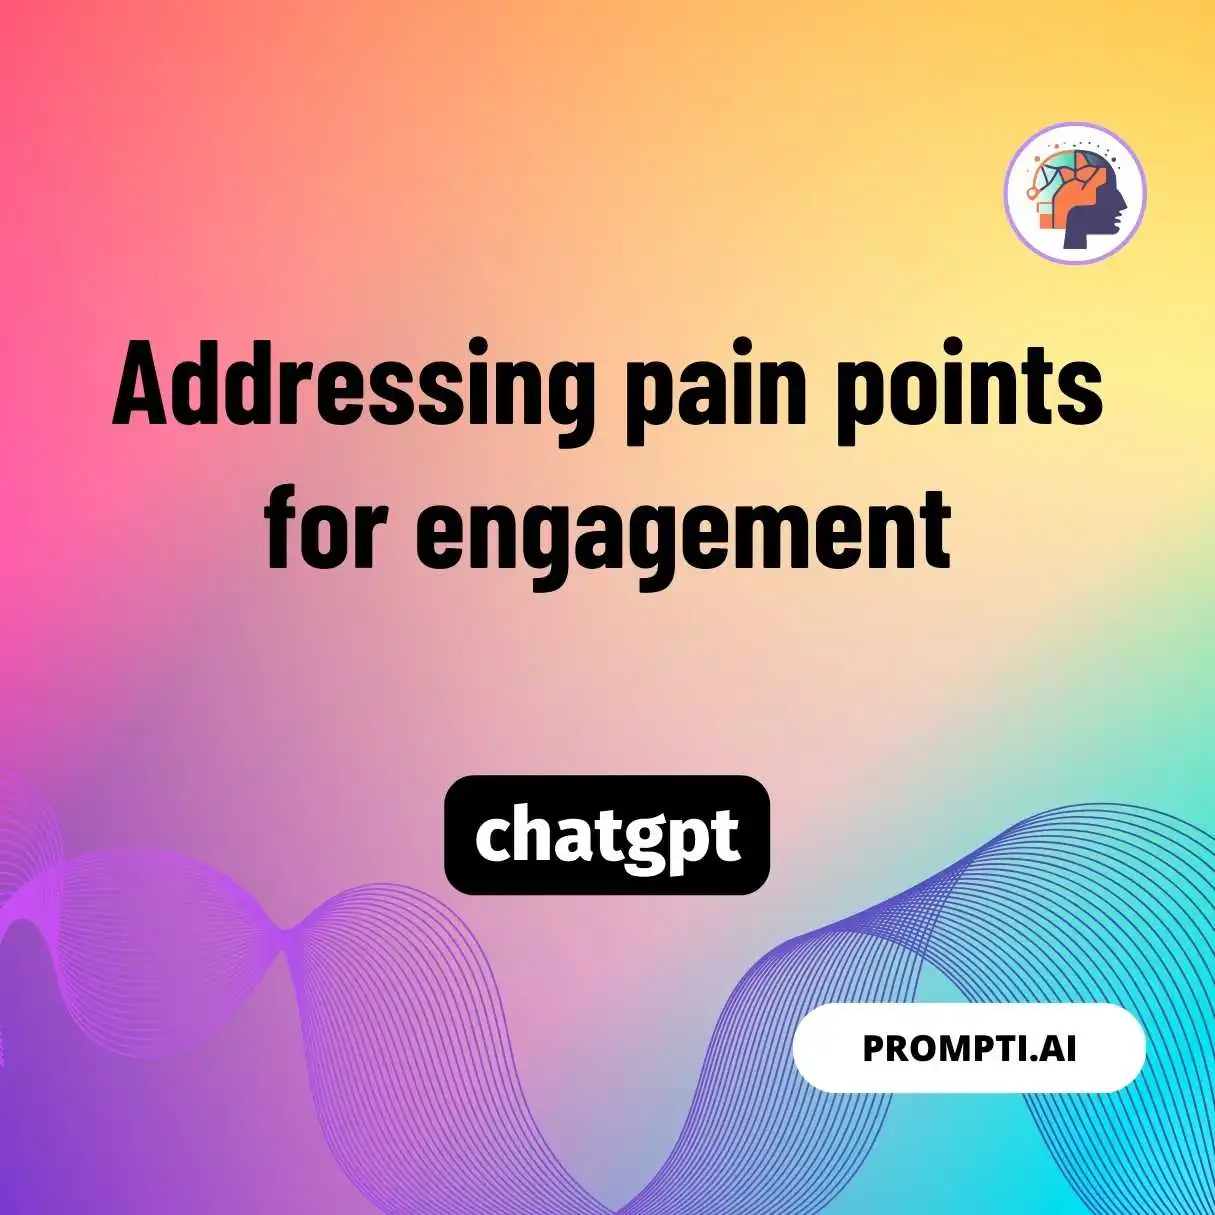 Addressing pain points for engagement